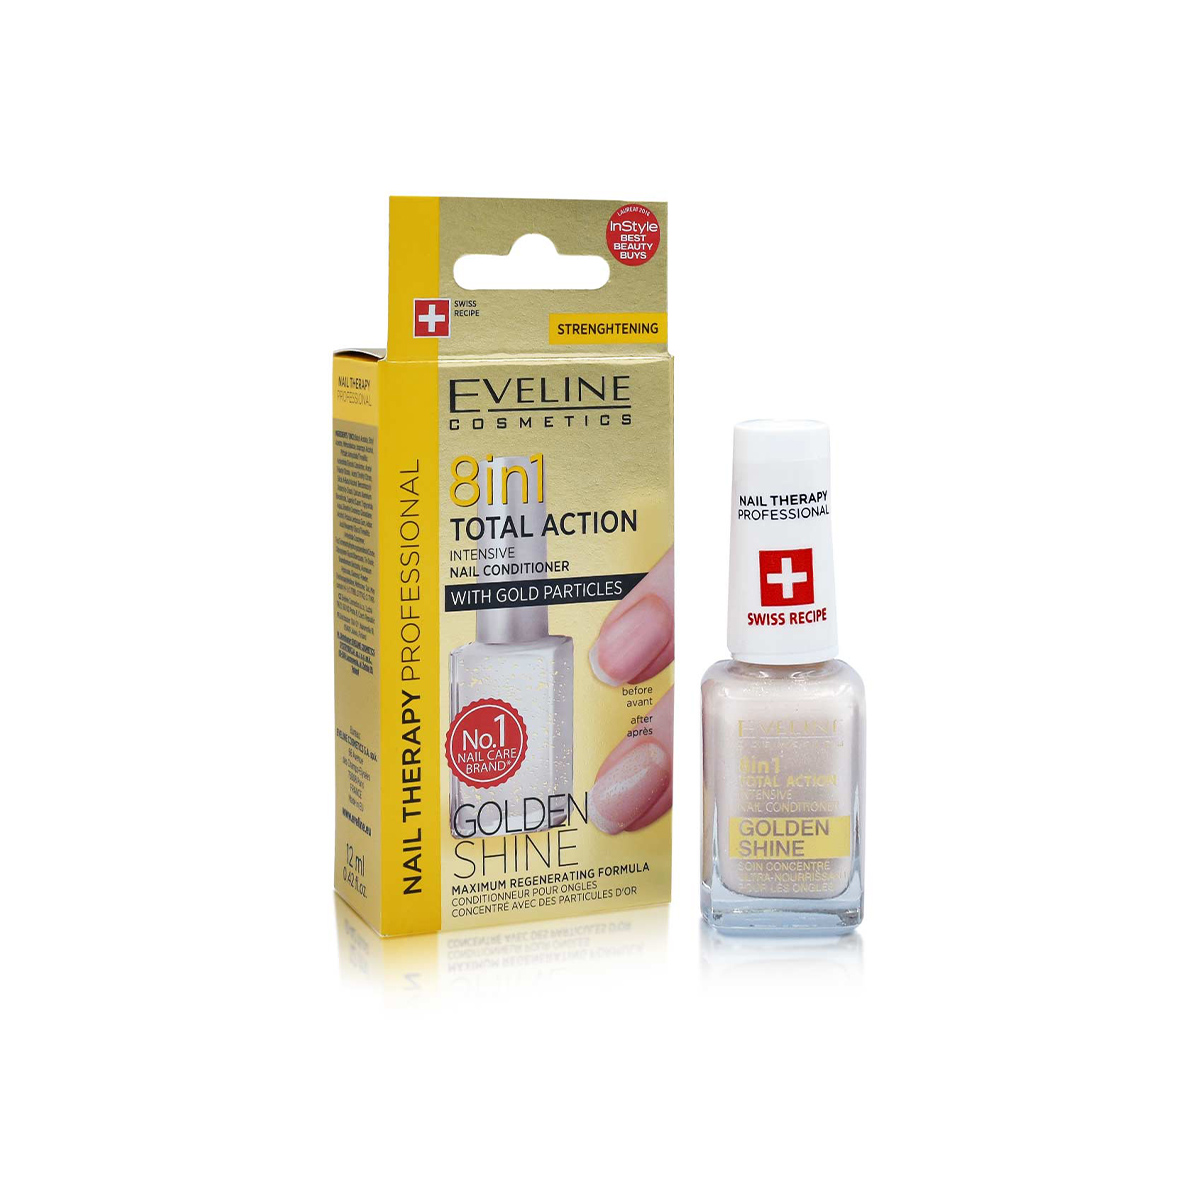 63-5901761972436-Eveline Cosmetics Nail Therapy Conditioner 8IN1 Golden Shine 12ml